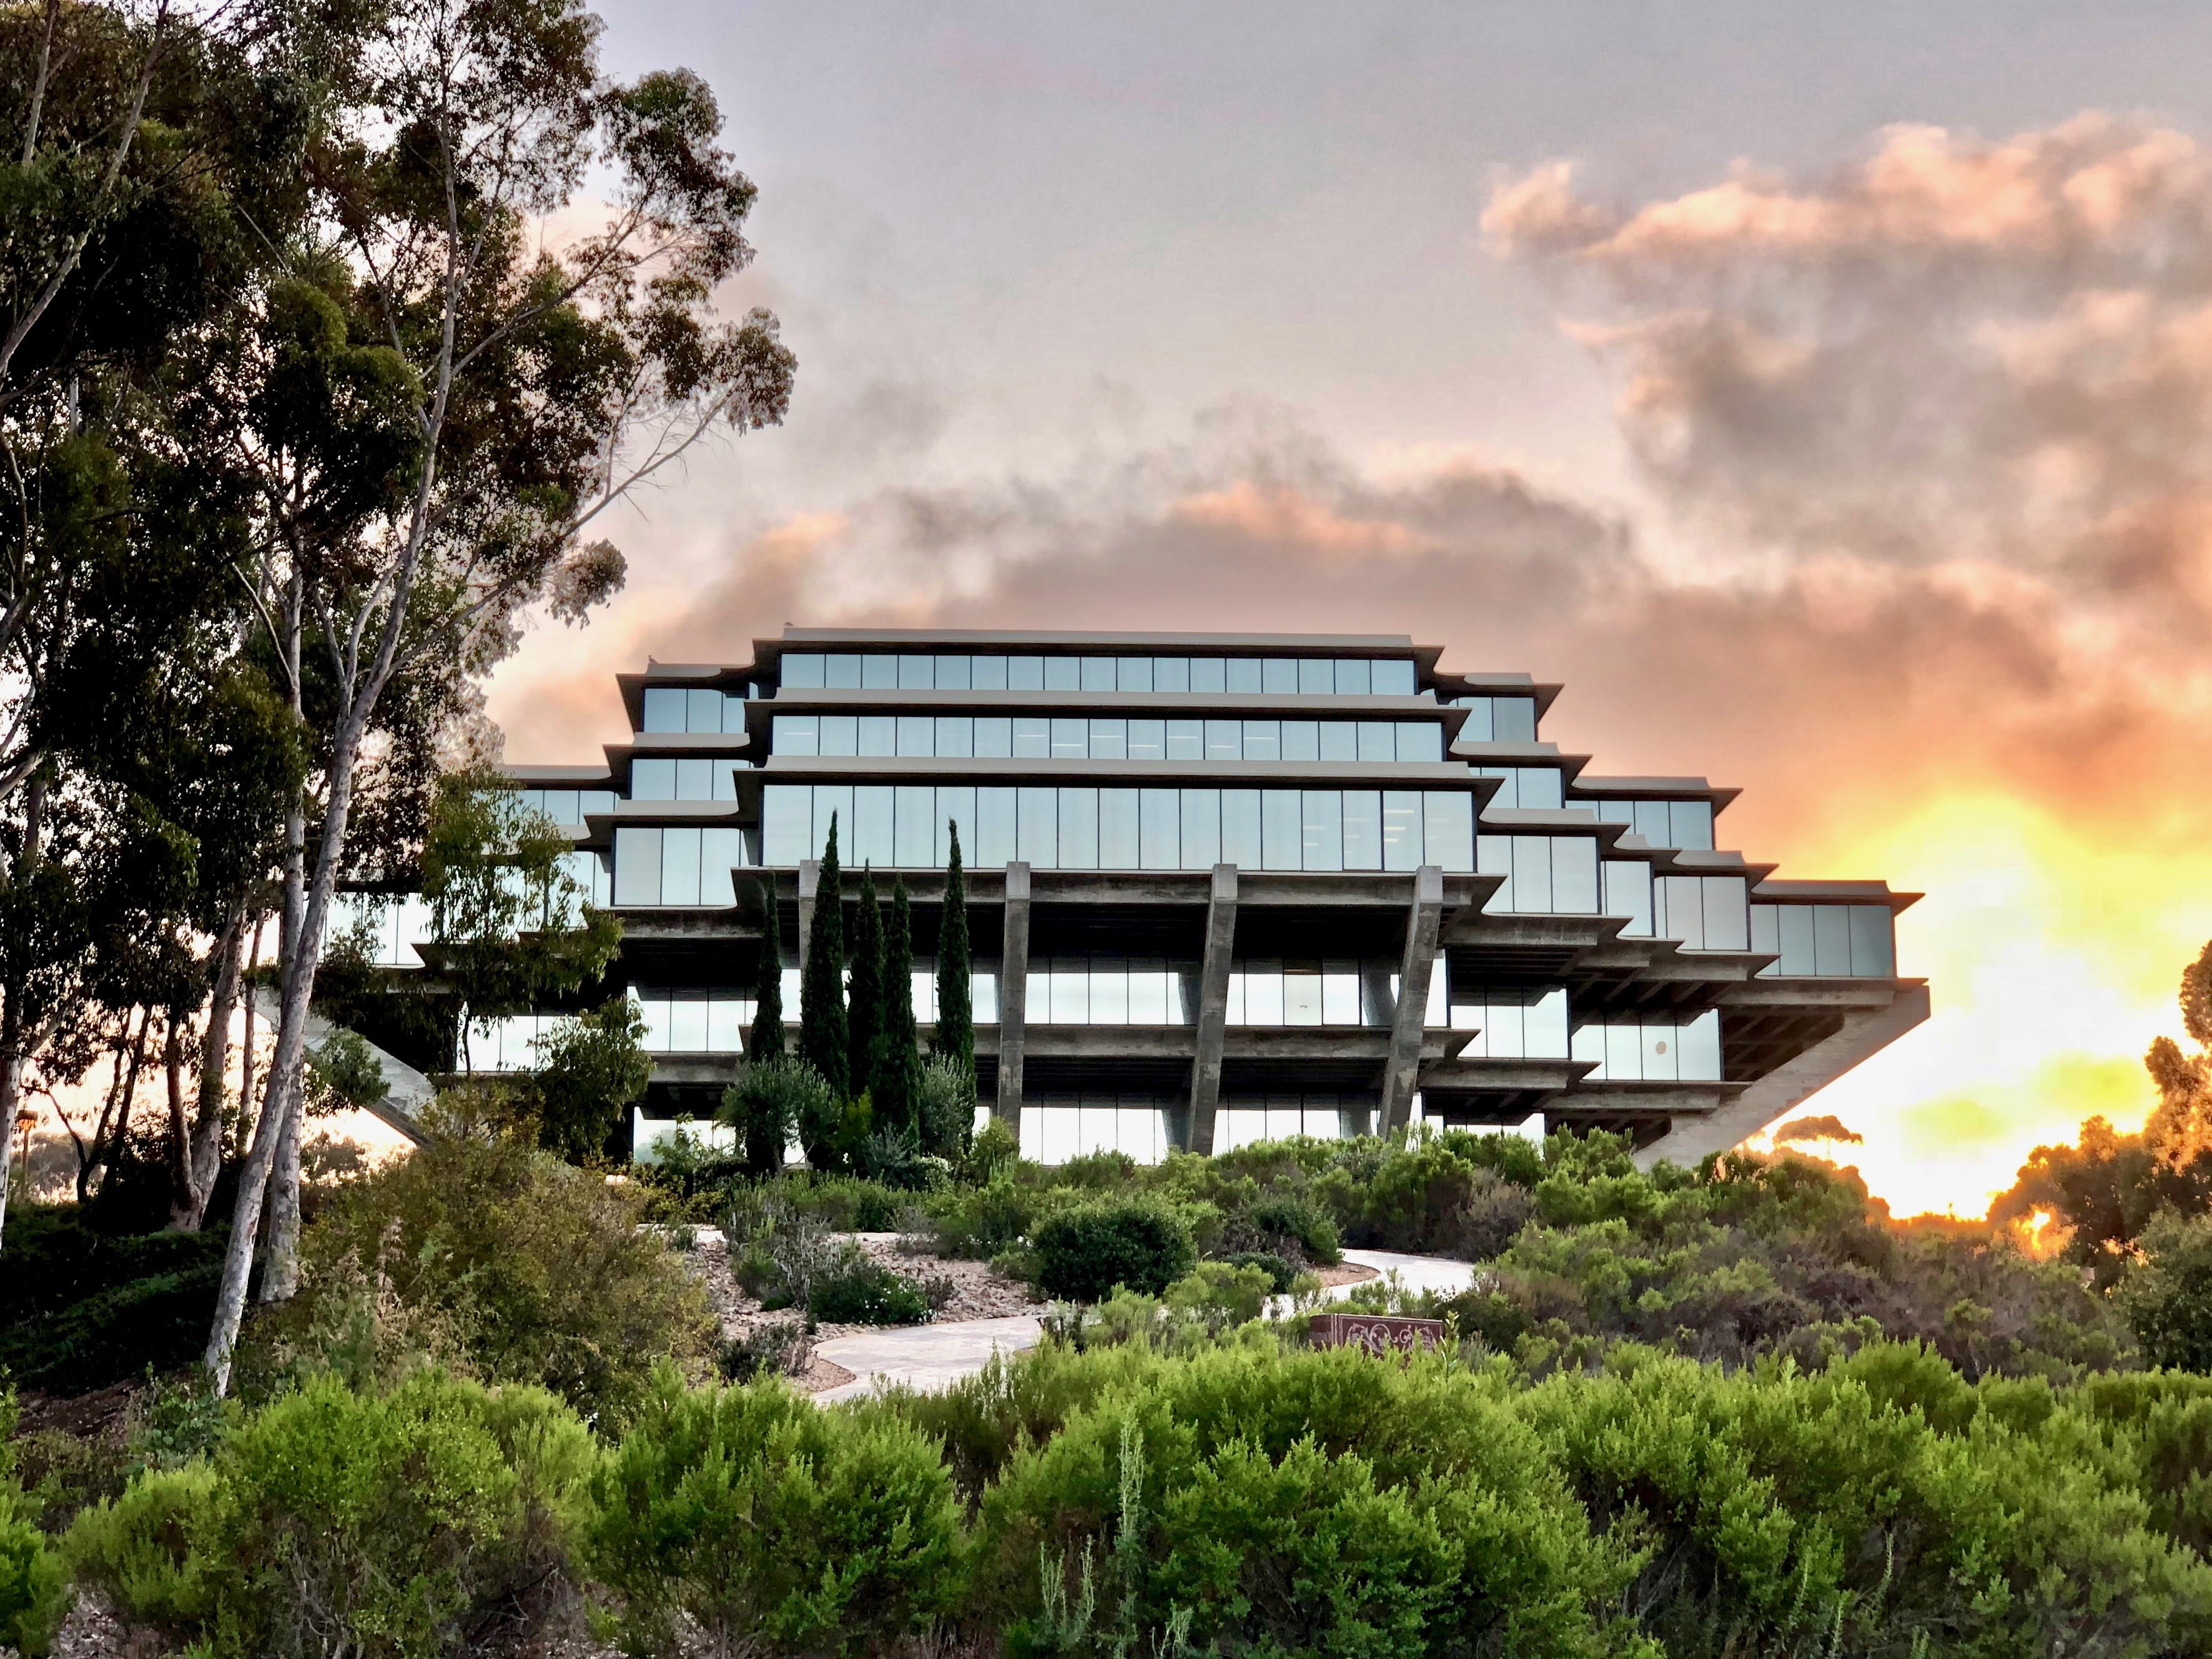 united states, san diego, geisel library, architecture, built structure